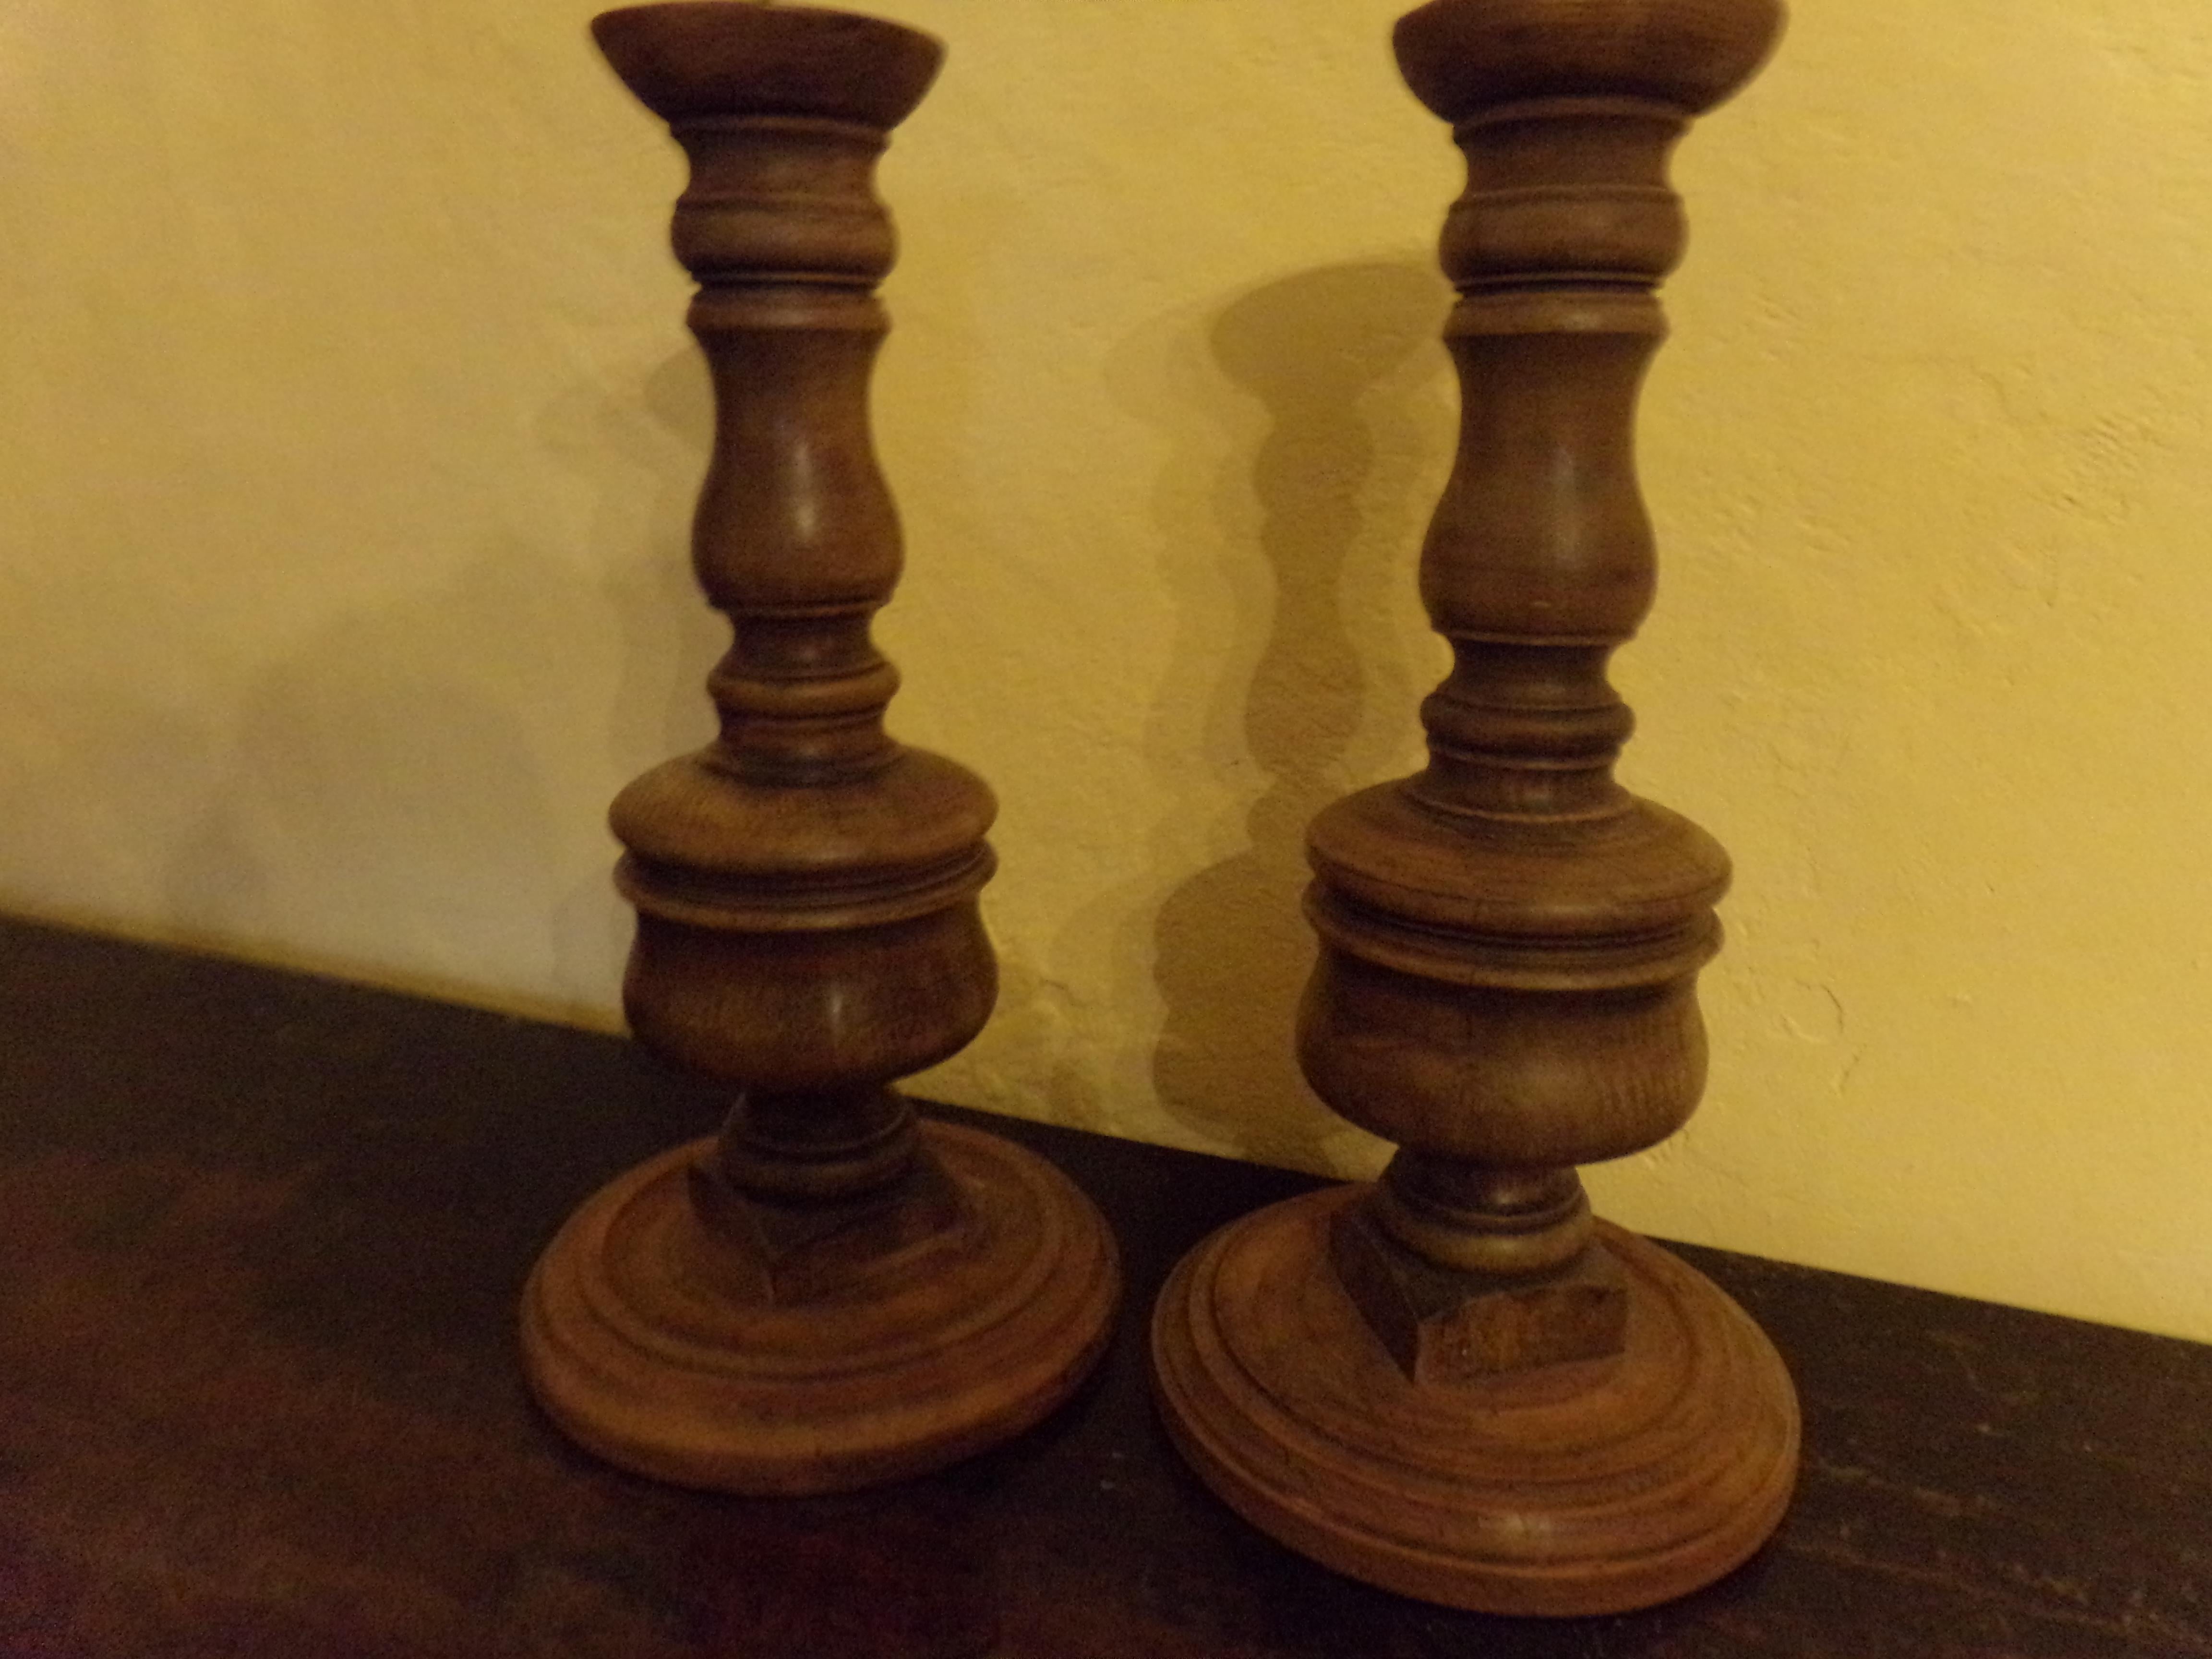 Beautiful pair of impressive pricket candlesticks of turned walnut beautifully crafted from original circa 1890s wood turnings. Our craftsman has retained all the original patination. A beautiful holiday gift for all the family!
We are listing five